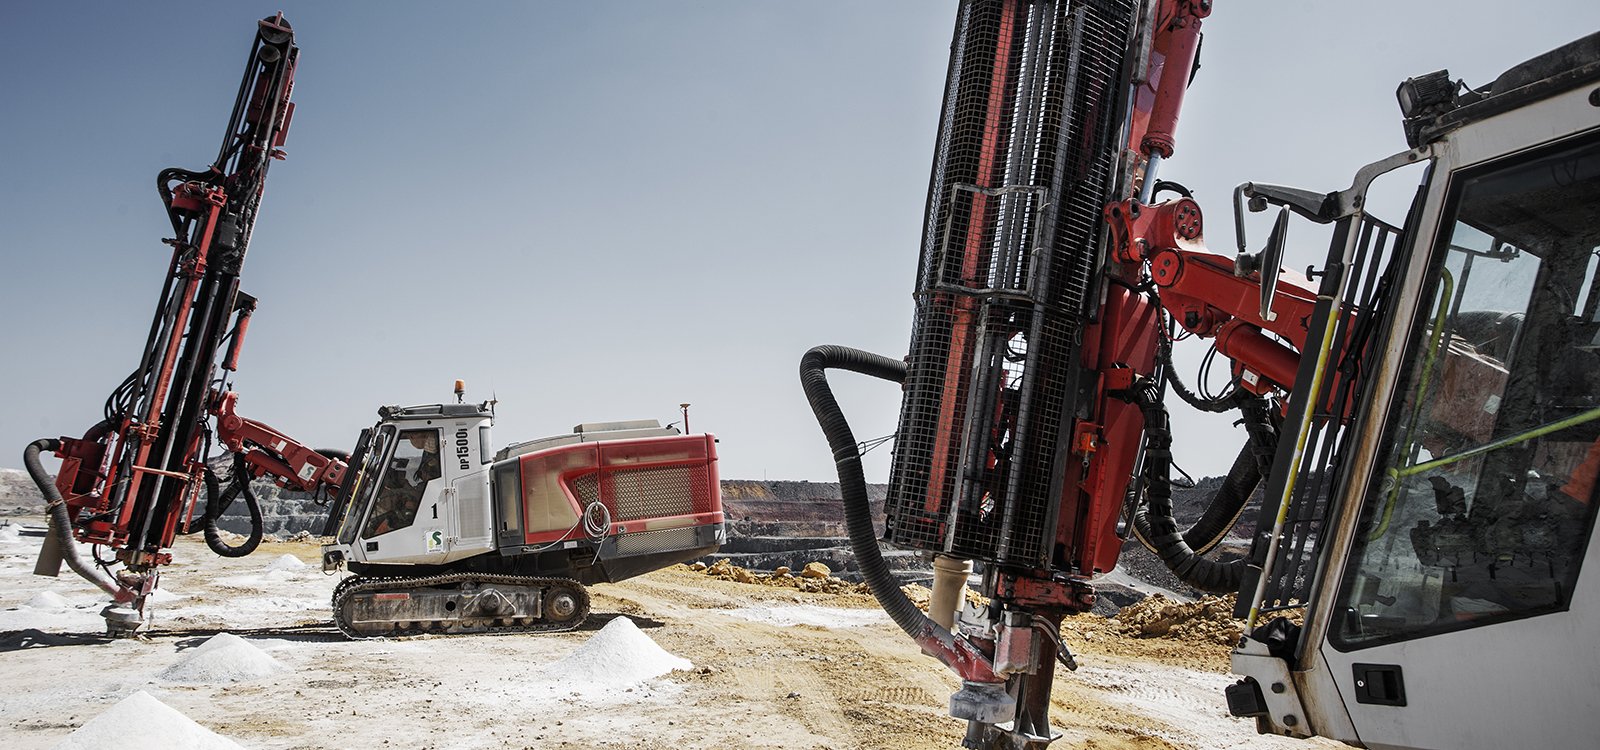 “Pantera DP1500i is perfectly matched to our drilling application,” says INSERSA production manager Laureano Pazos Pérez. “It is reliable, robust, easy to handle and simple to maintain. The drilling is very efficient and we reach our production goals easily.”